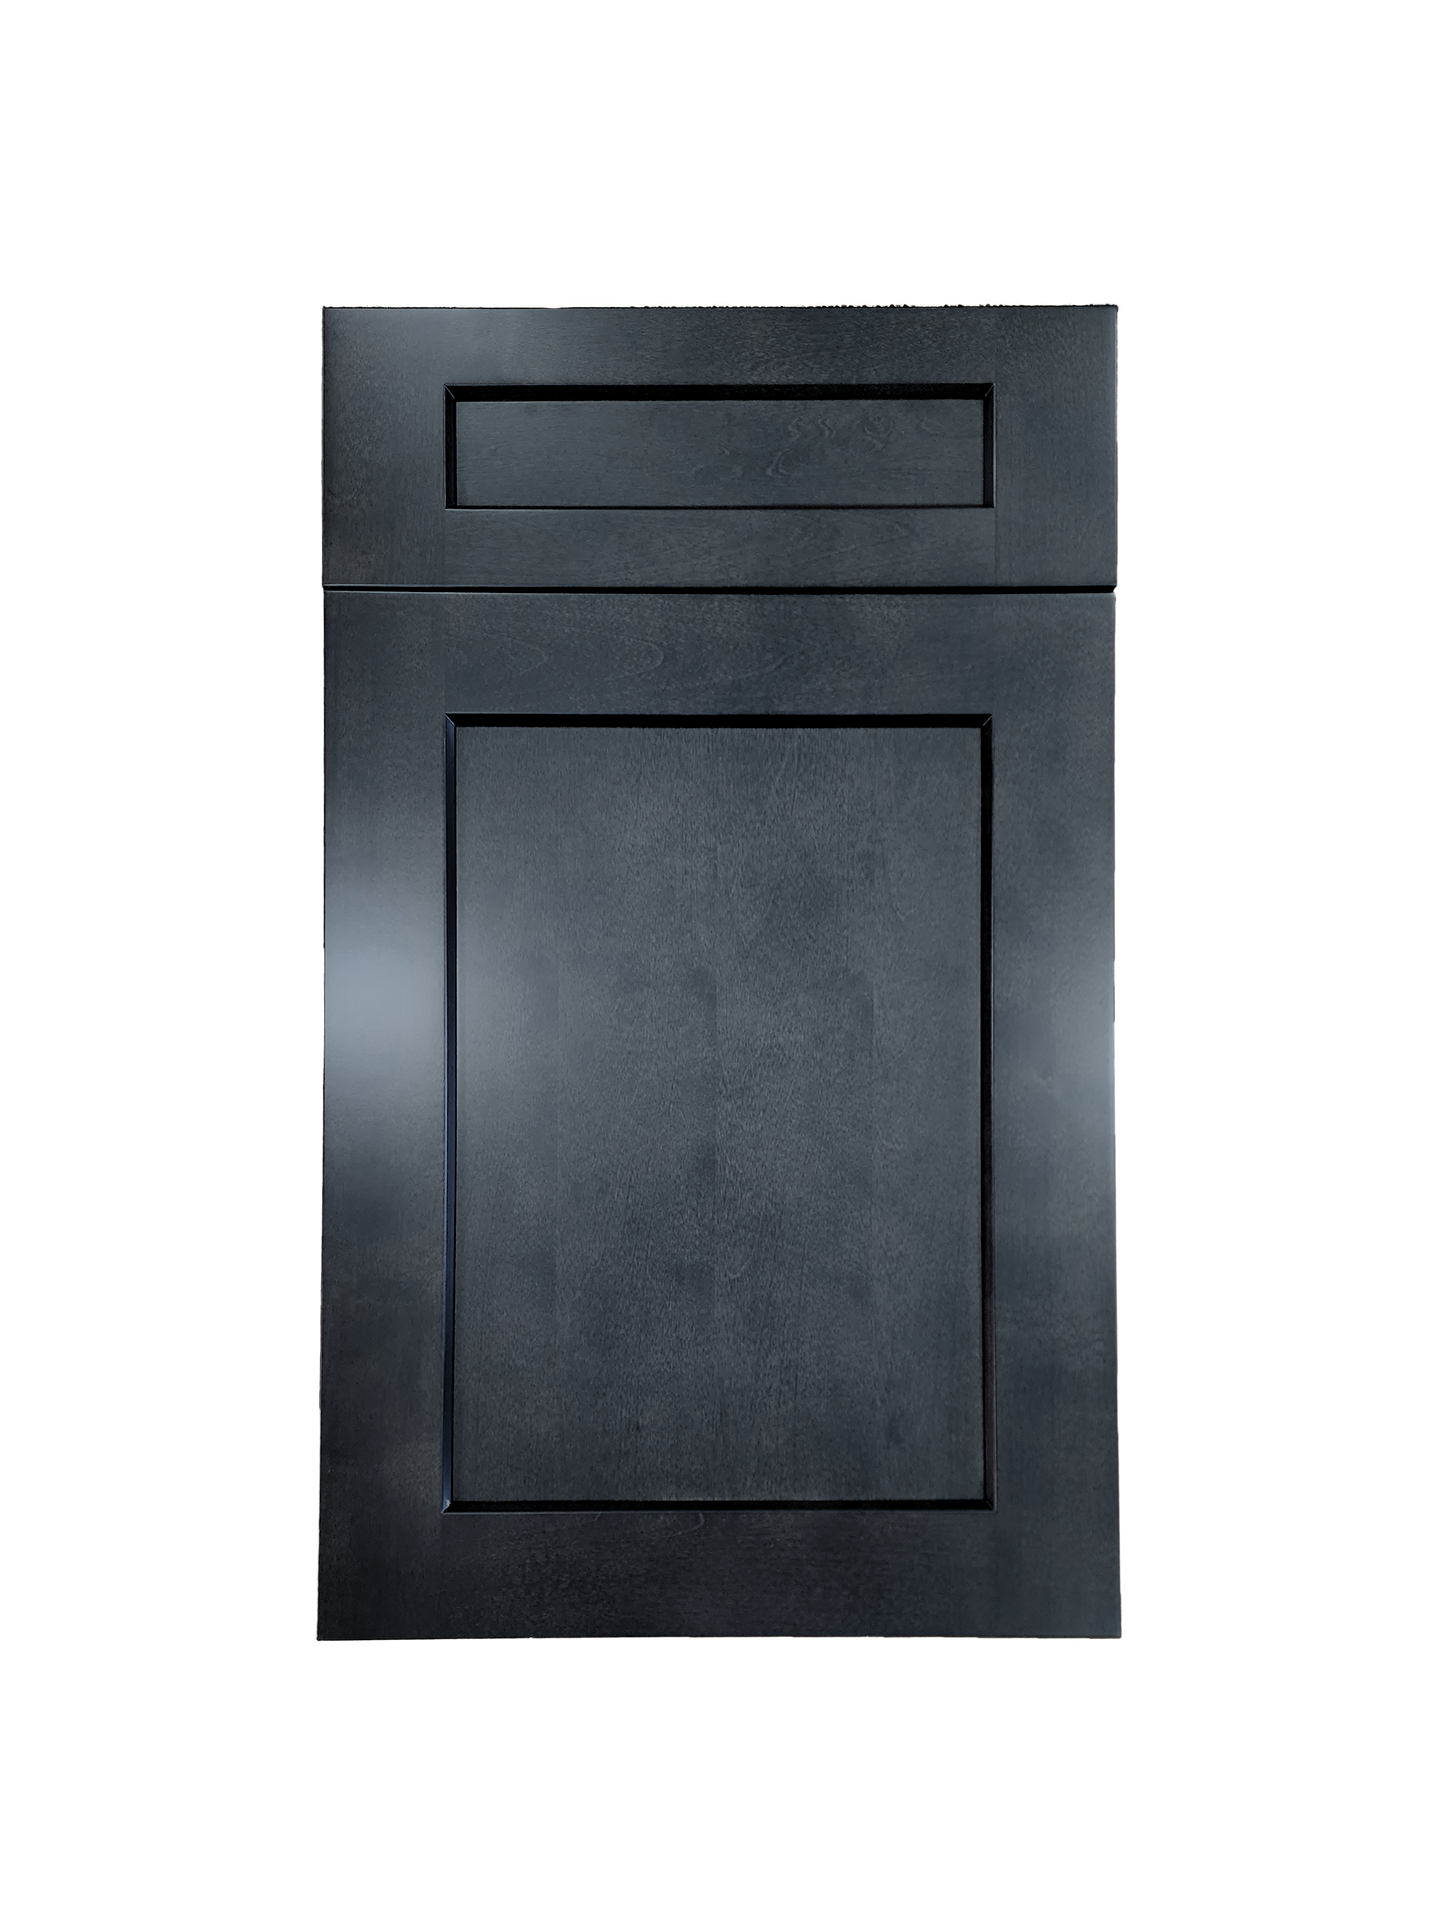 Stormy Grey Wall Cabinet 9 inches wide 12 inches deep 36 inches tall with Stormy Grey box and Stormy Grey doors